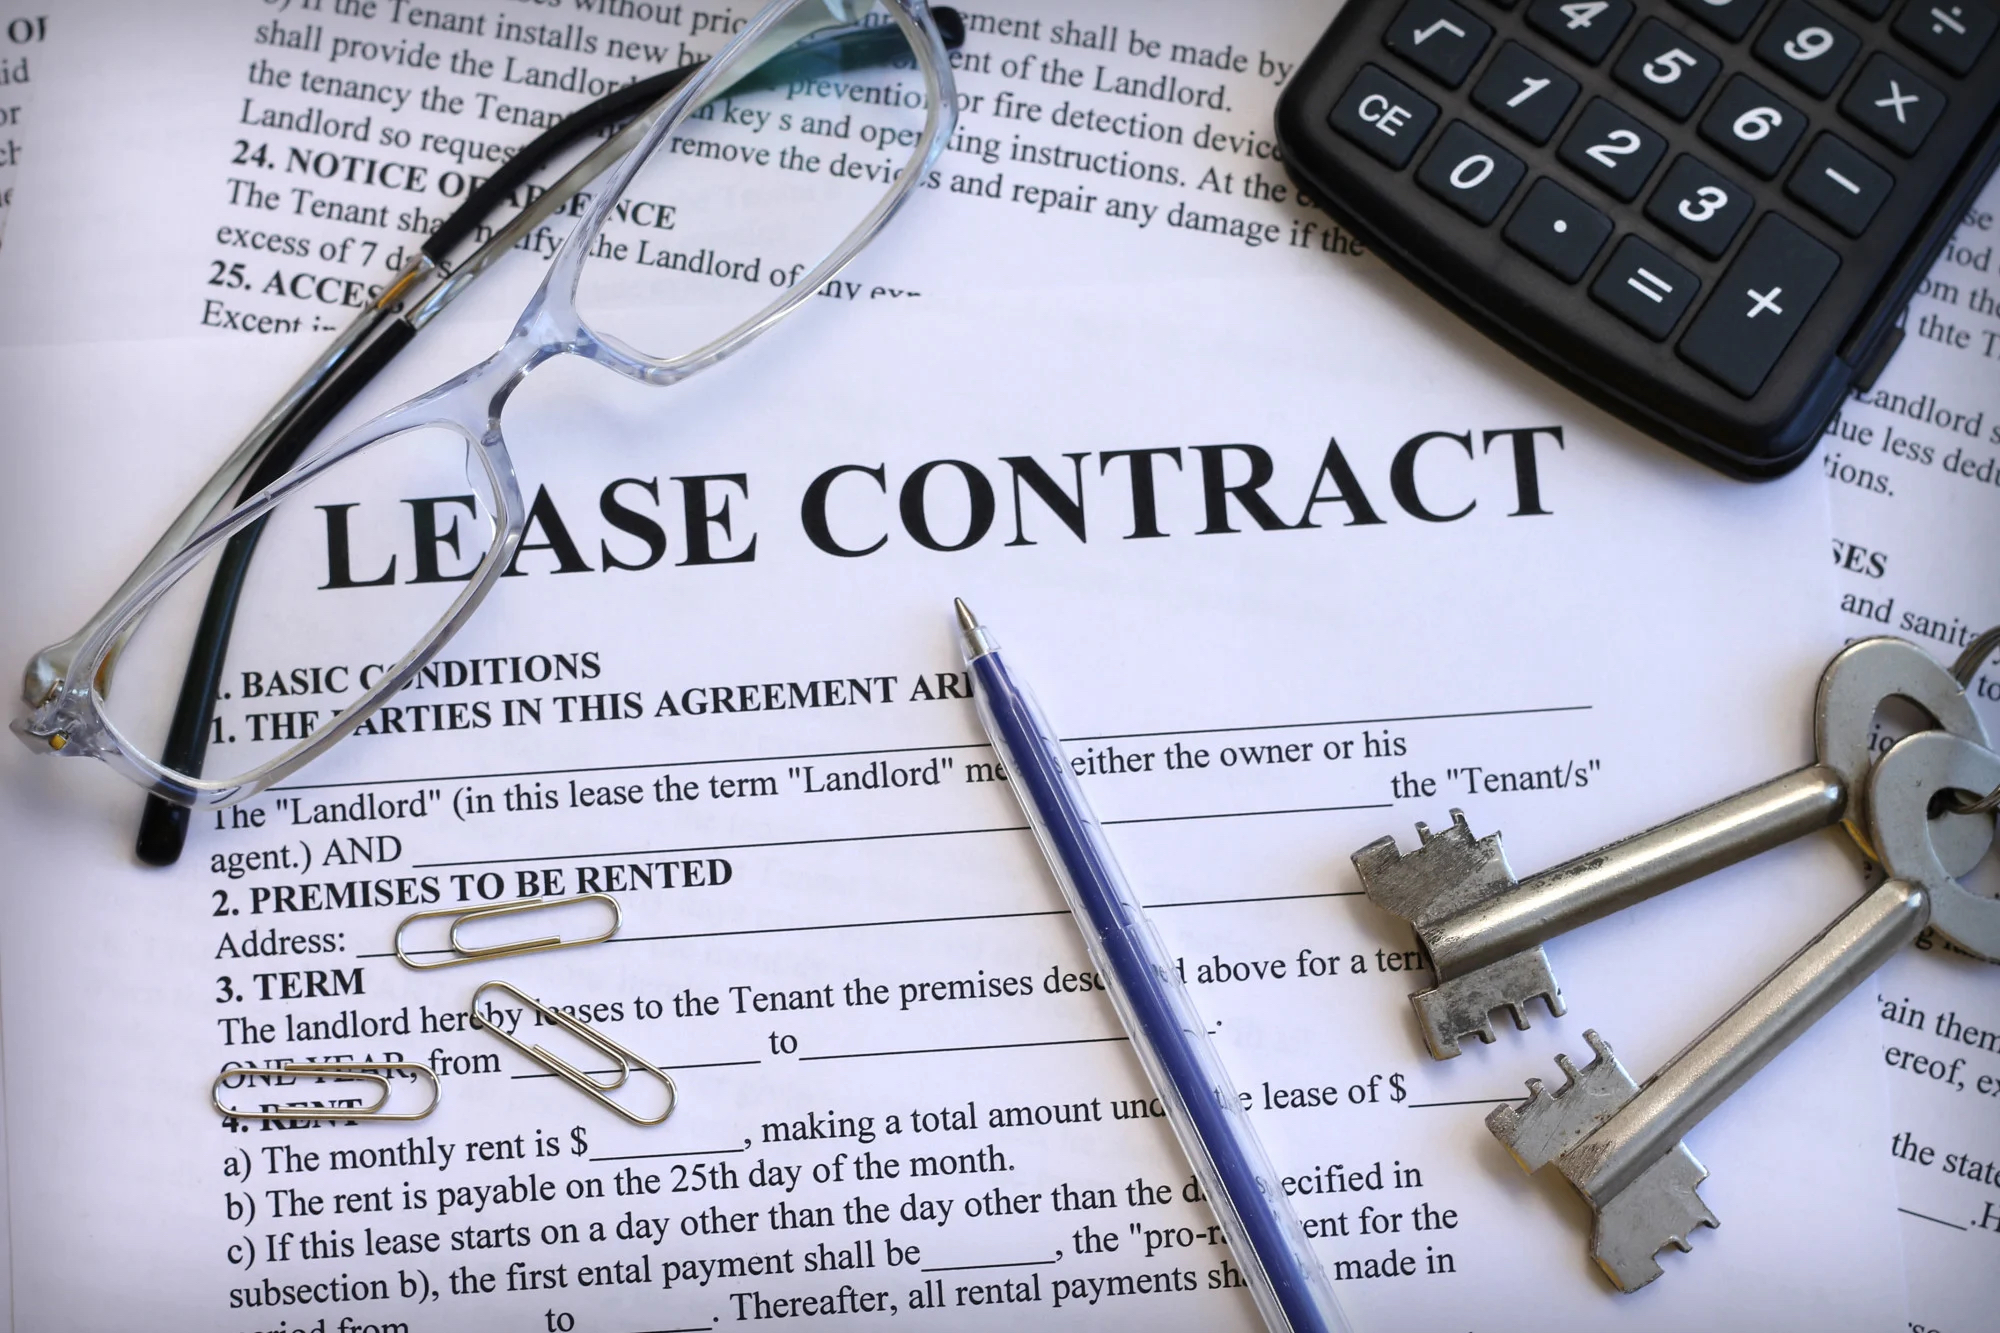 An Antelope Valley Landlord's Guide to Lease Enforcement